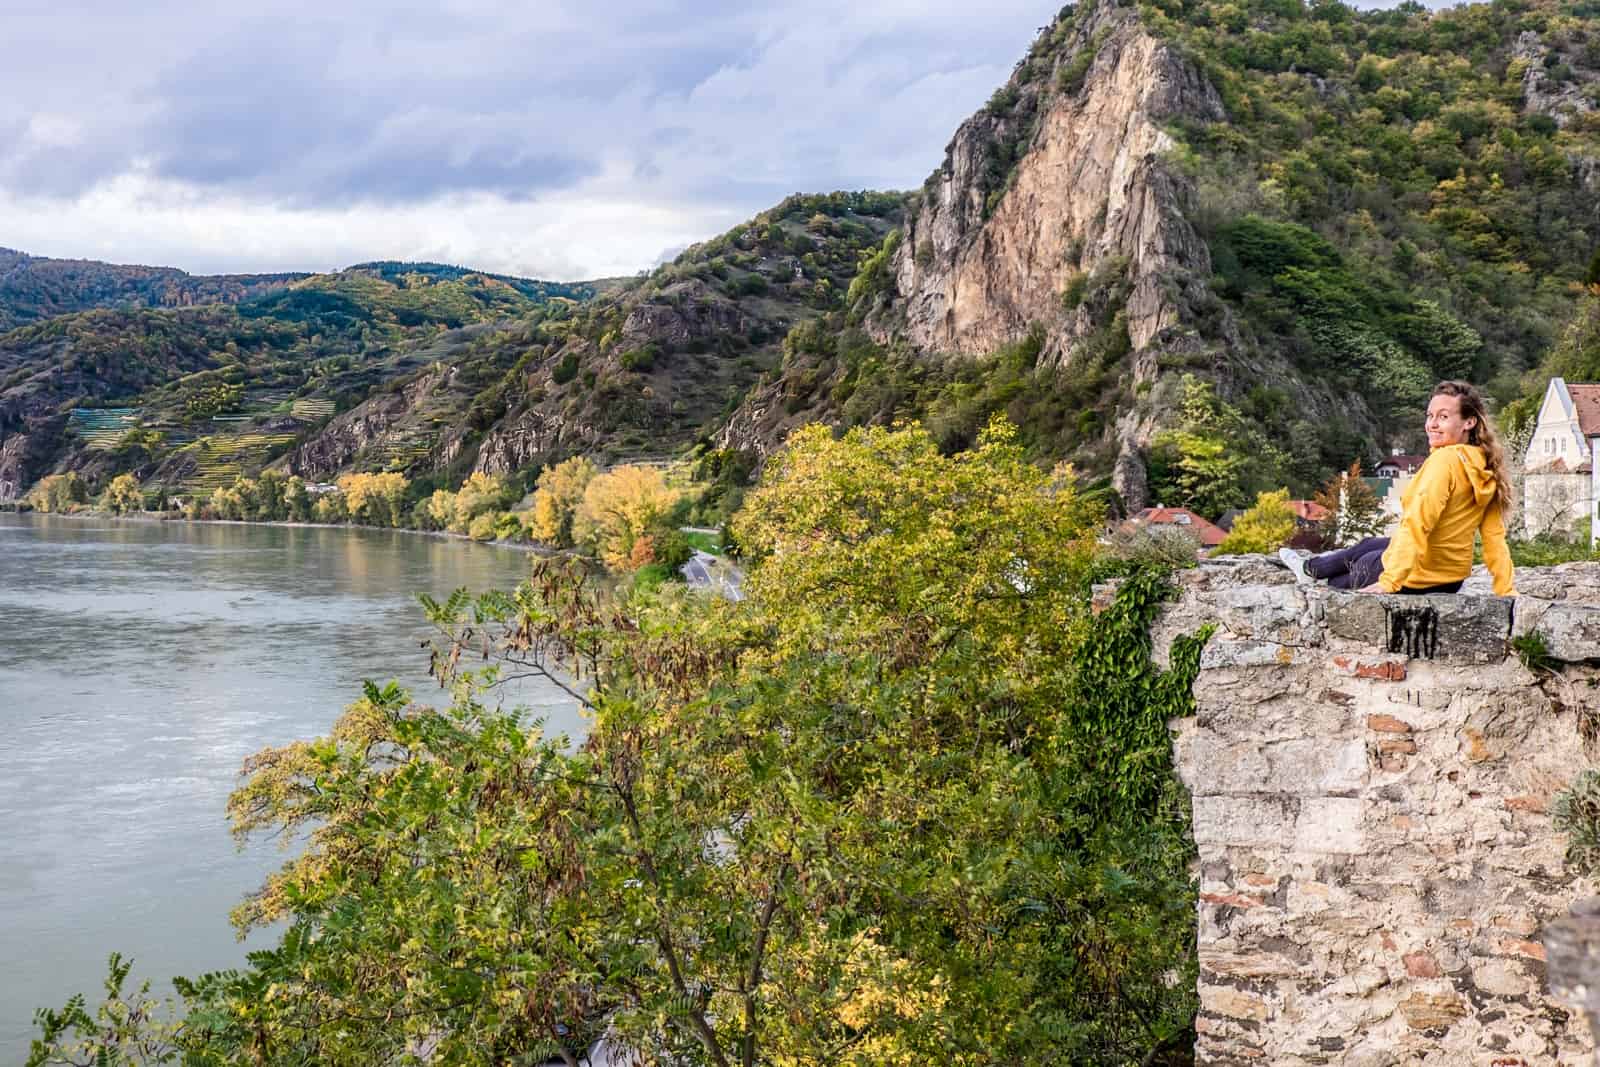 A woman wearing yellow sits on an old stone wall in the Wachau Valley next to the Danube River. She looks at the camera and smiles. Behind her is a large cliff face and a small white house.